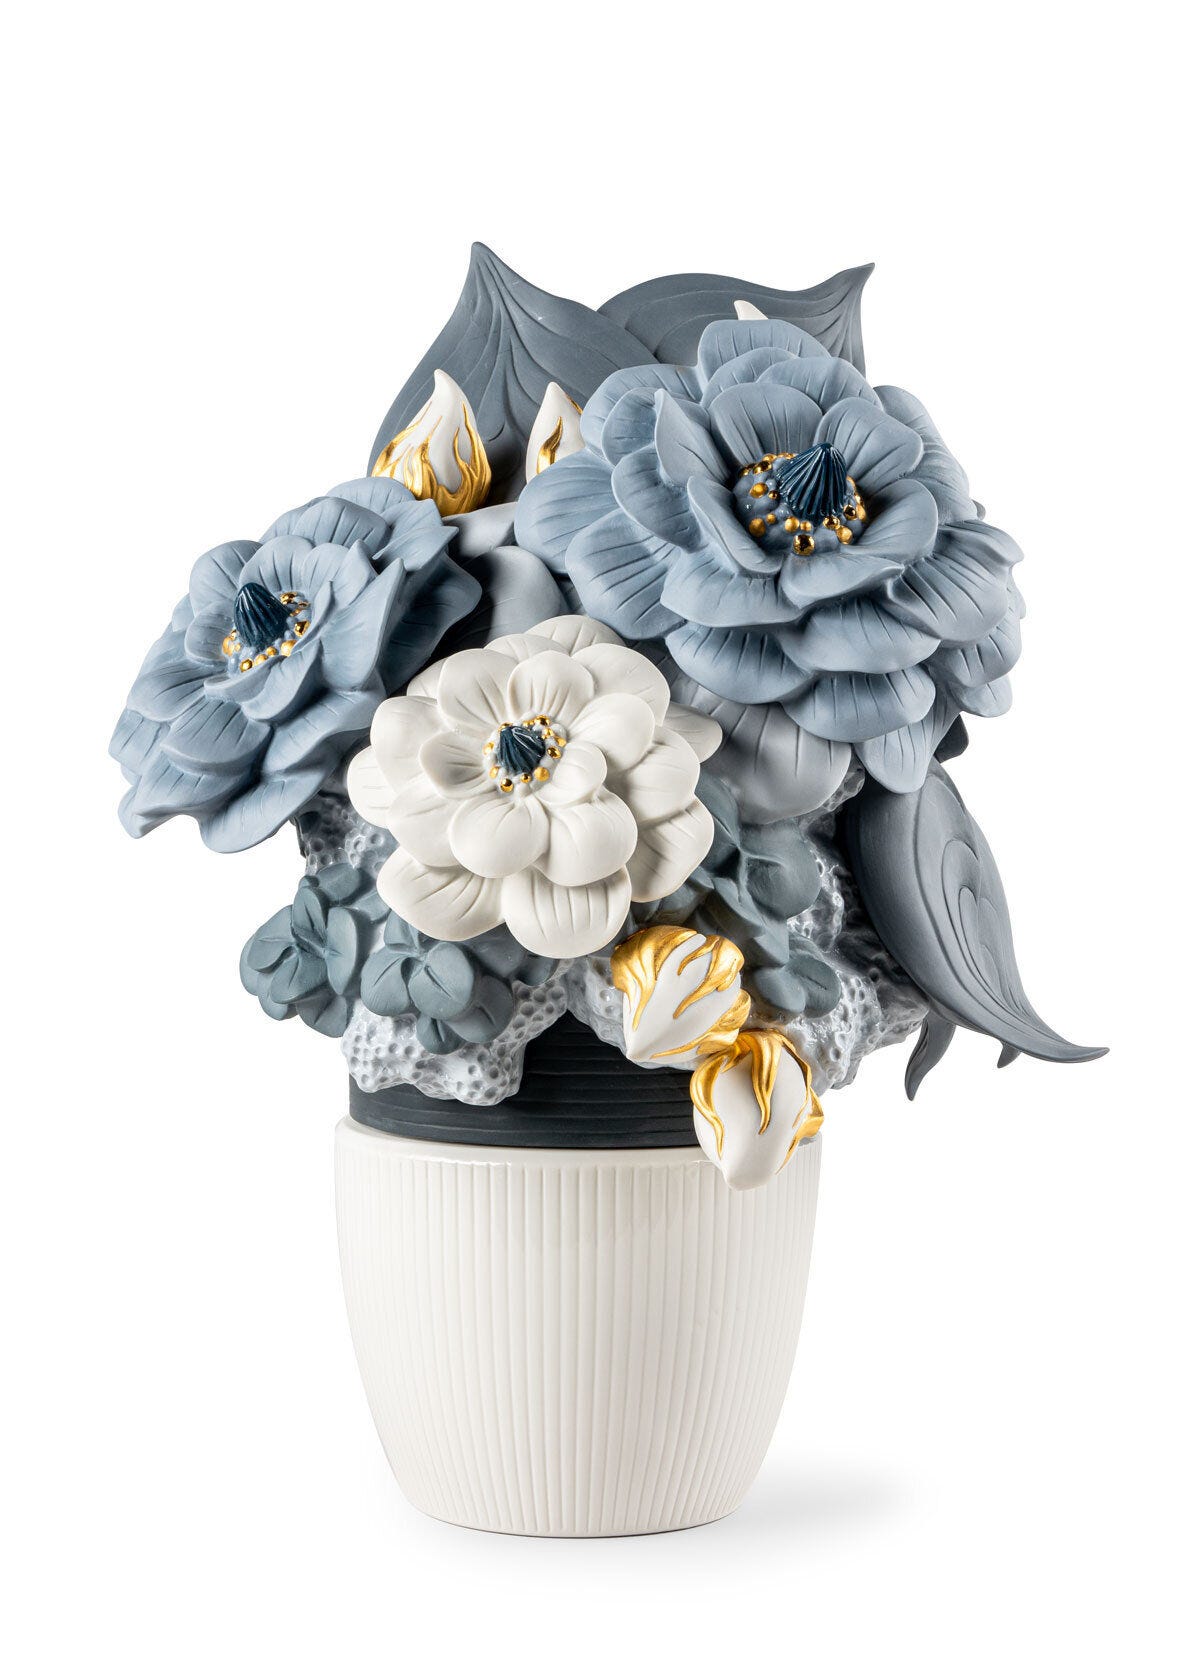 Vase with Flowers. Blue